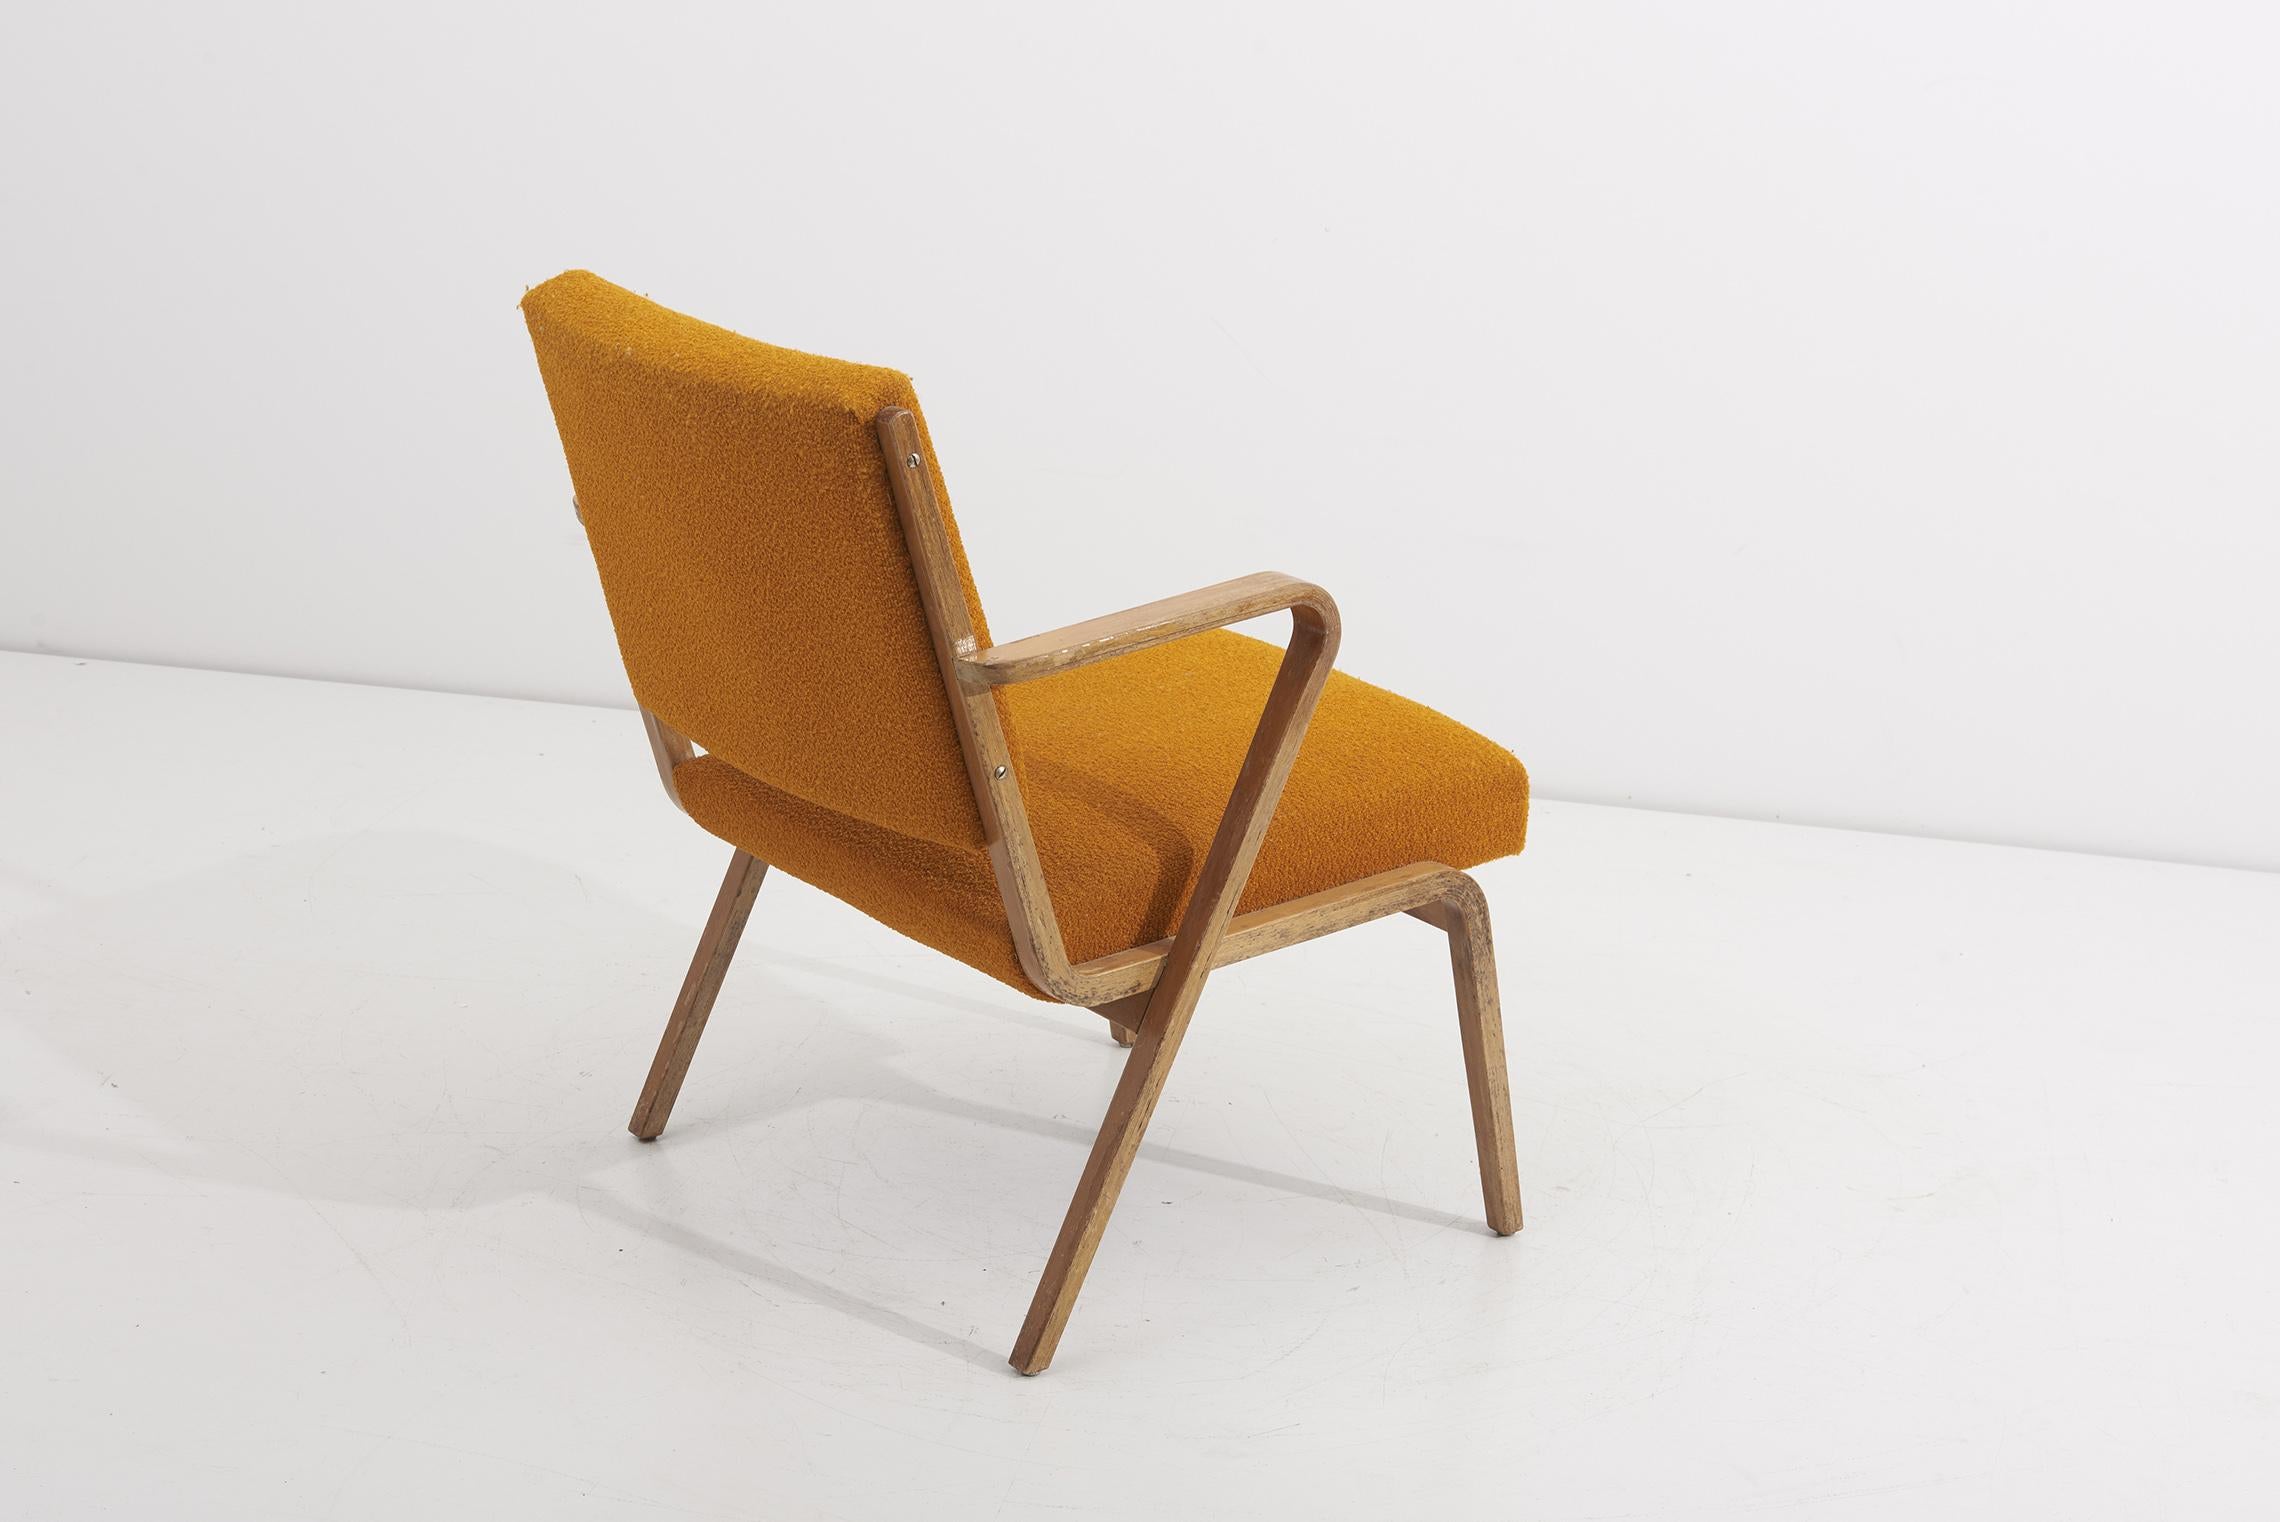 1950s Easy or Lounge Chair Set by Selman Selmanagic in mustard yellow For Sale 2